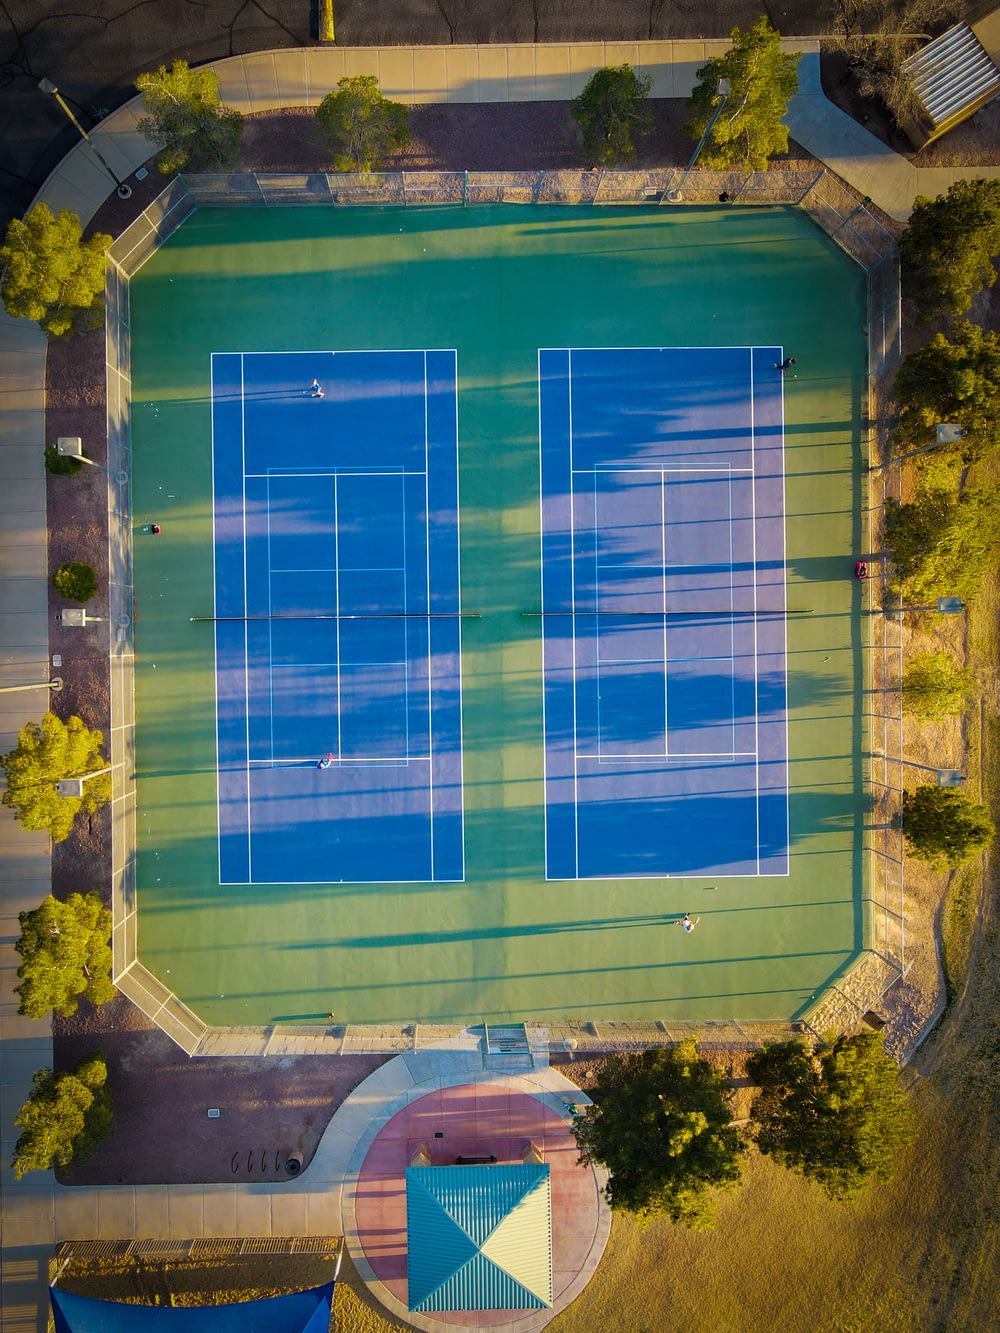 an aerial view of a tennis court with two tennis courts